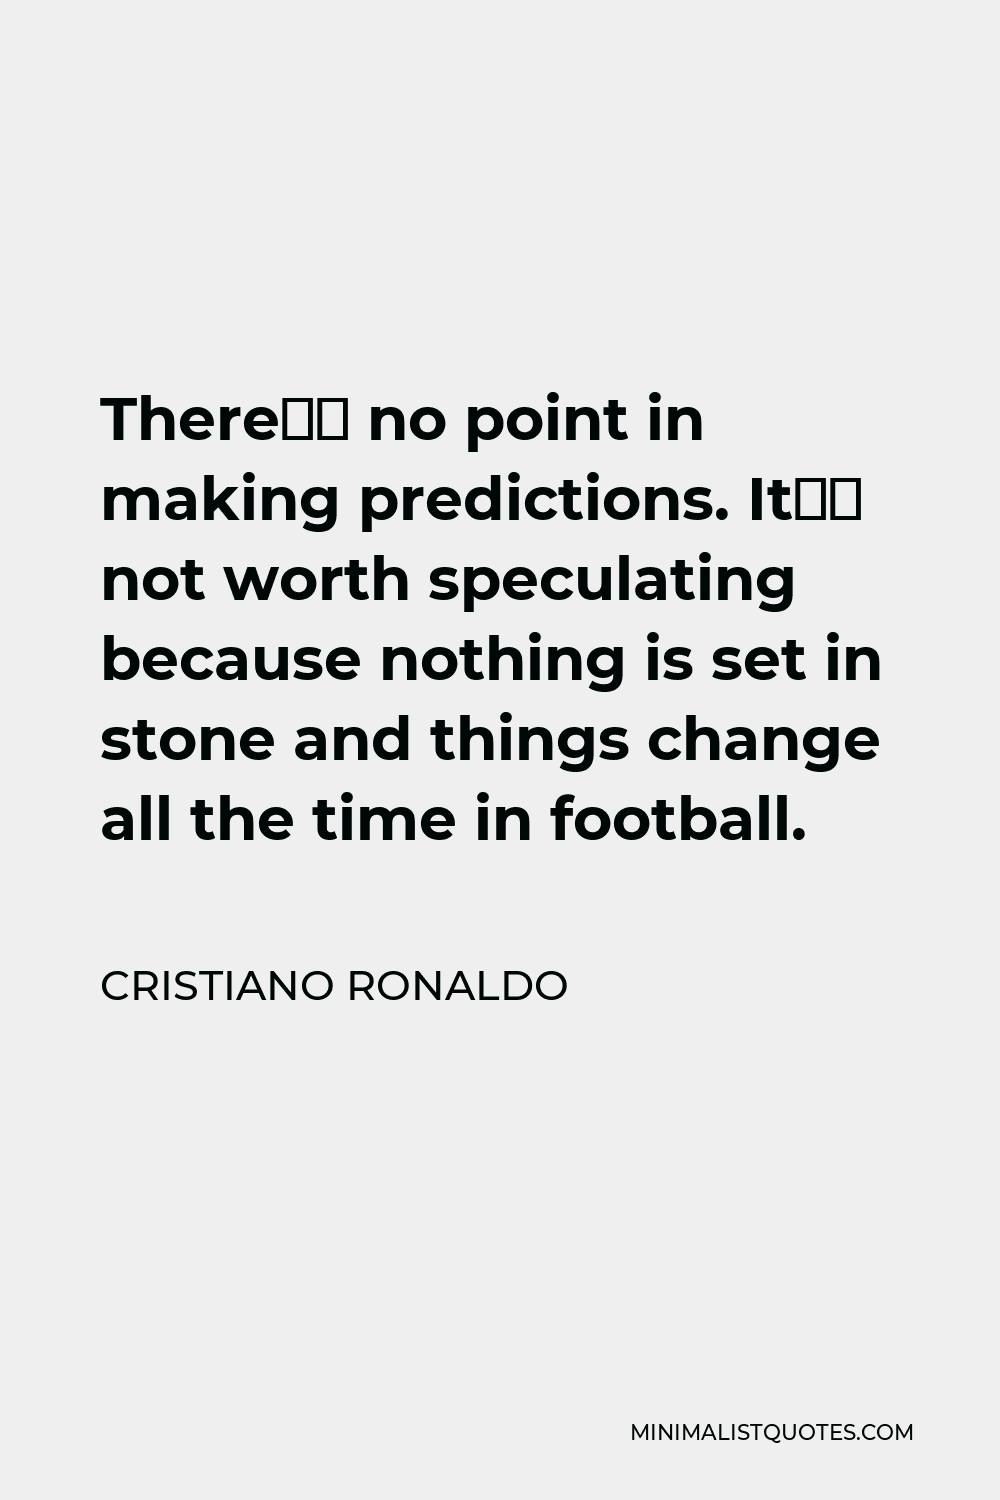 Cristiano Ronaldo Quote - There’s no point in making predictions. It’s not worth speculating because nothing is set in stone and things change all the time in football.